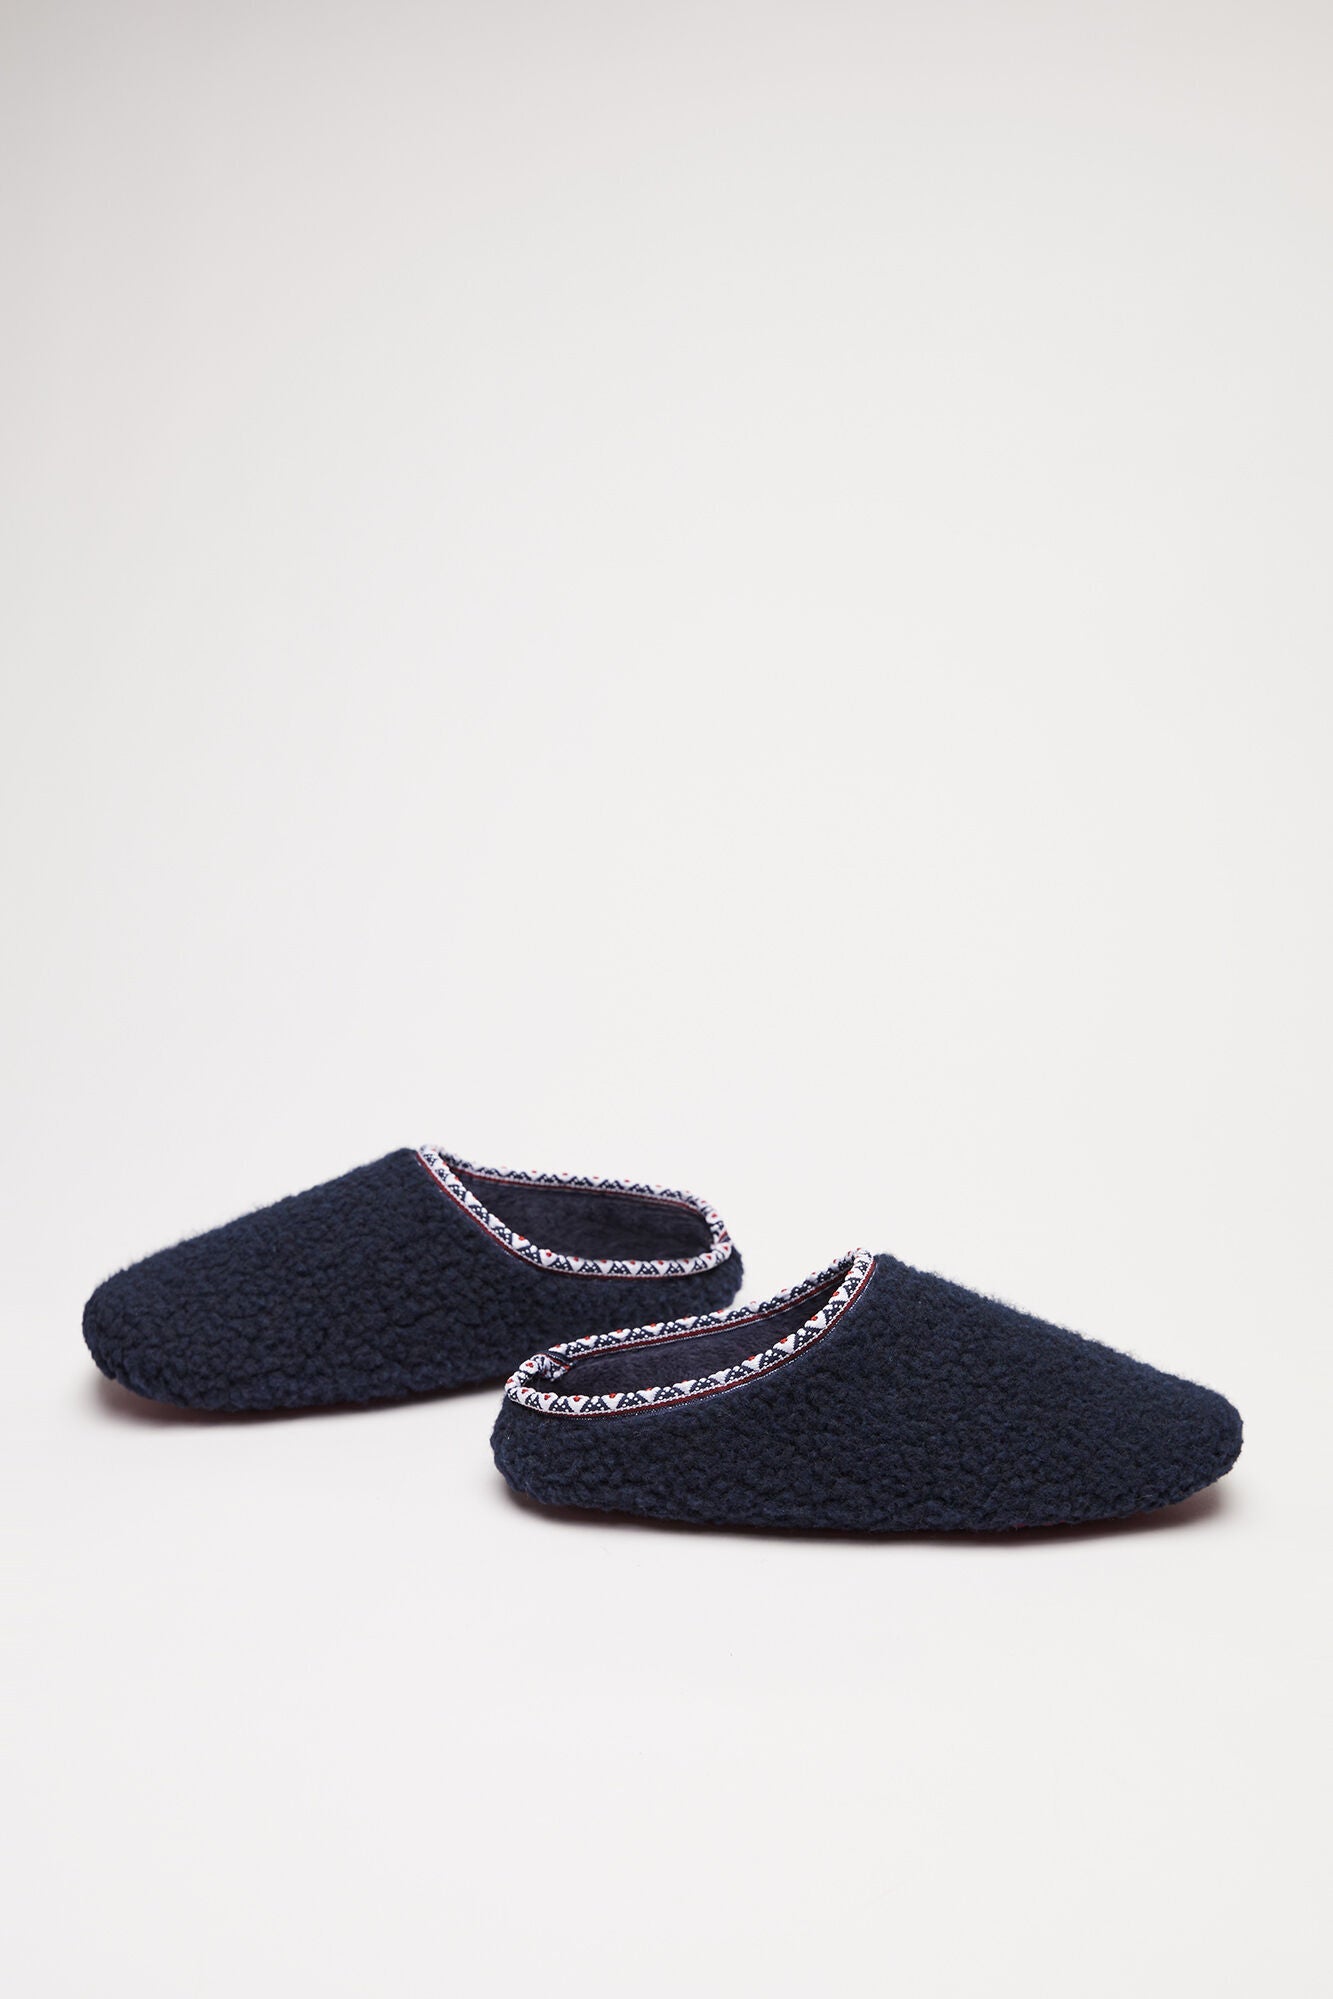 Winter Nomad Slippers